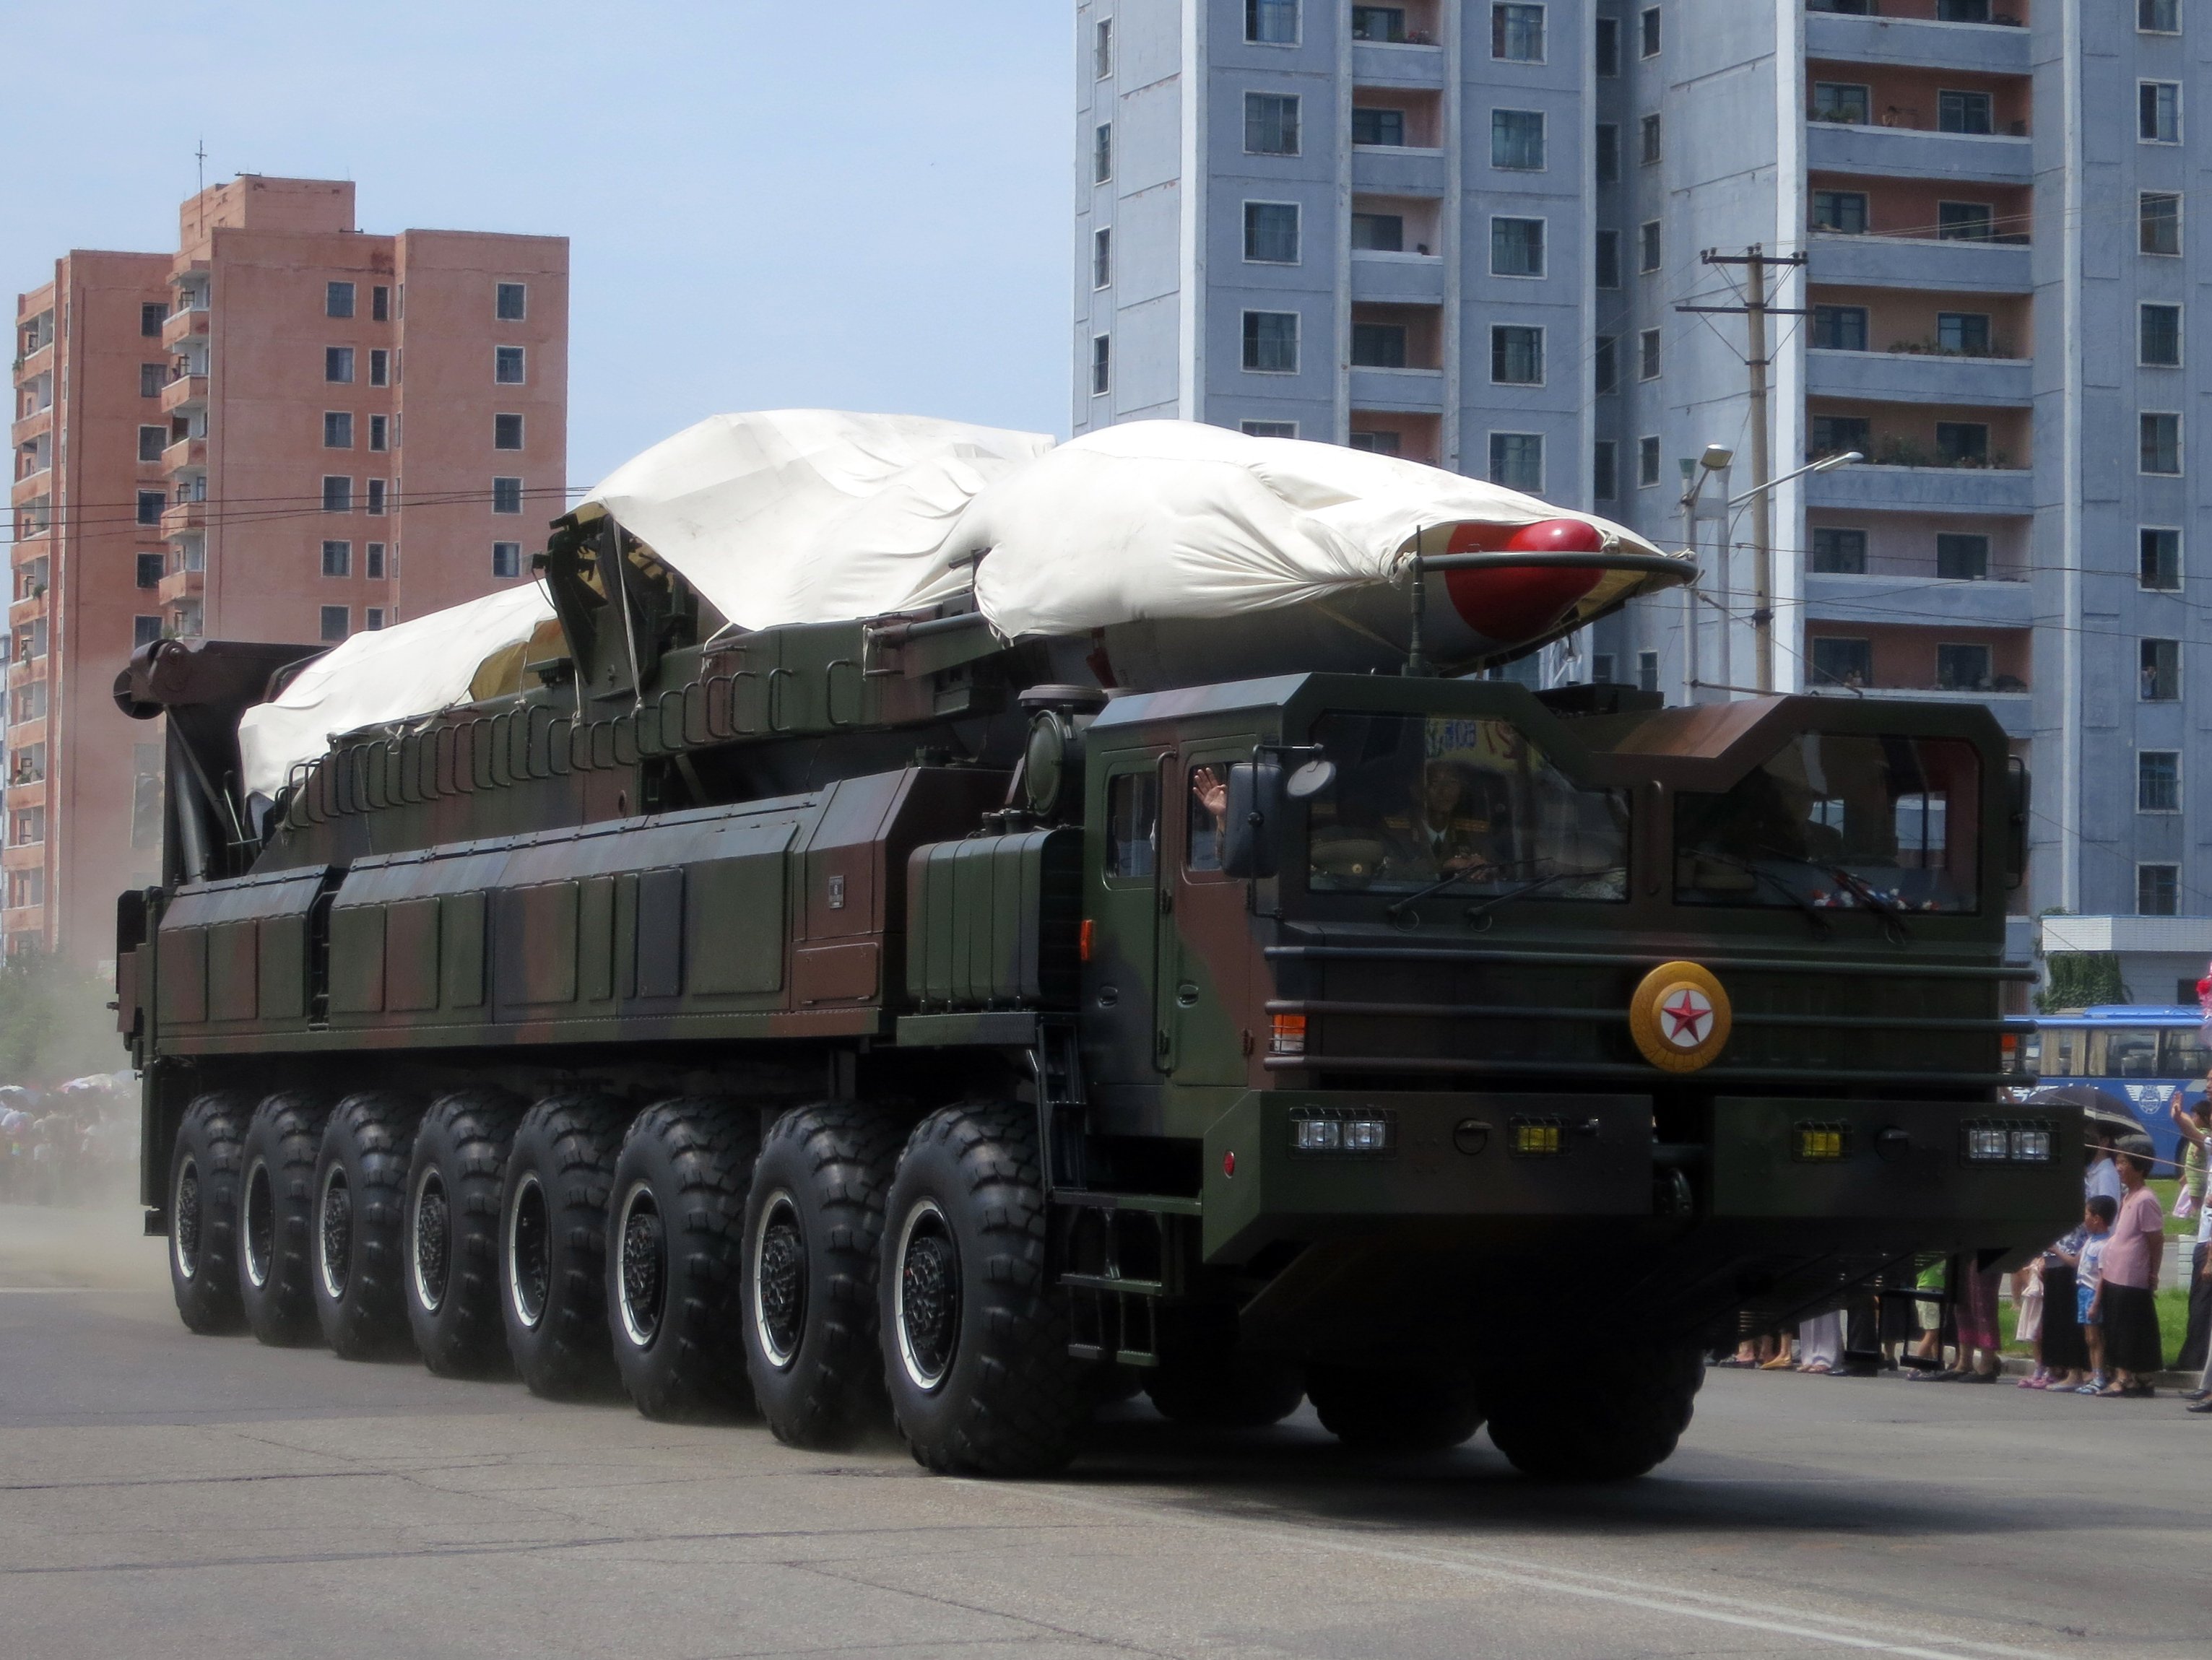 A ballistic missile on parade in North Korea, 2013.